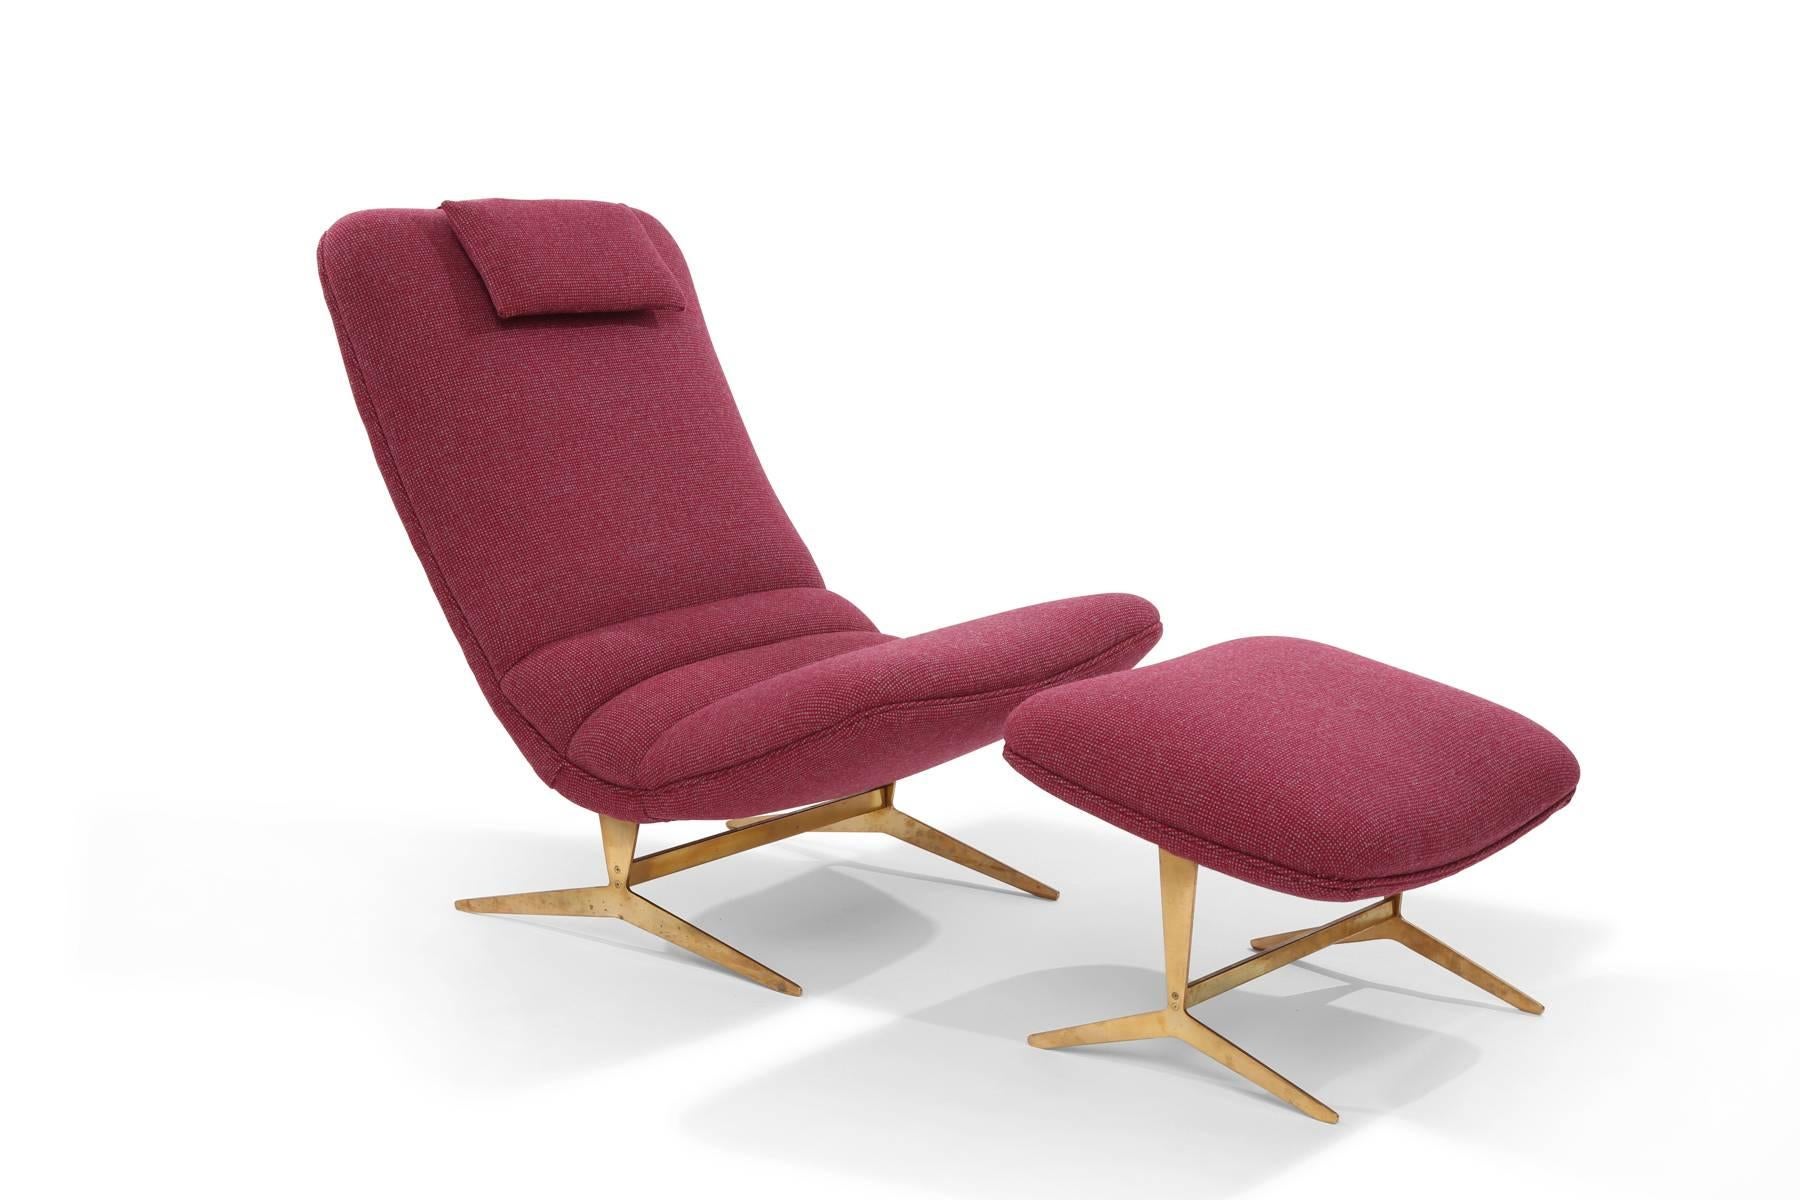 Stunning Italian lounge chair and ottoman, circa late 1950s. These examples have beautifully patinated solid brass bases and have been newly upholstered in a purple and gray wool textile. Price listed is for the chair and ottoman. Ottoman measures: